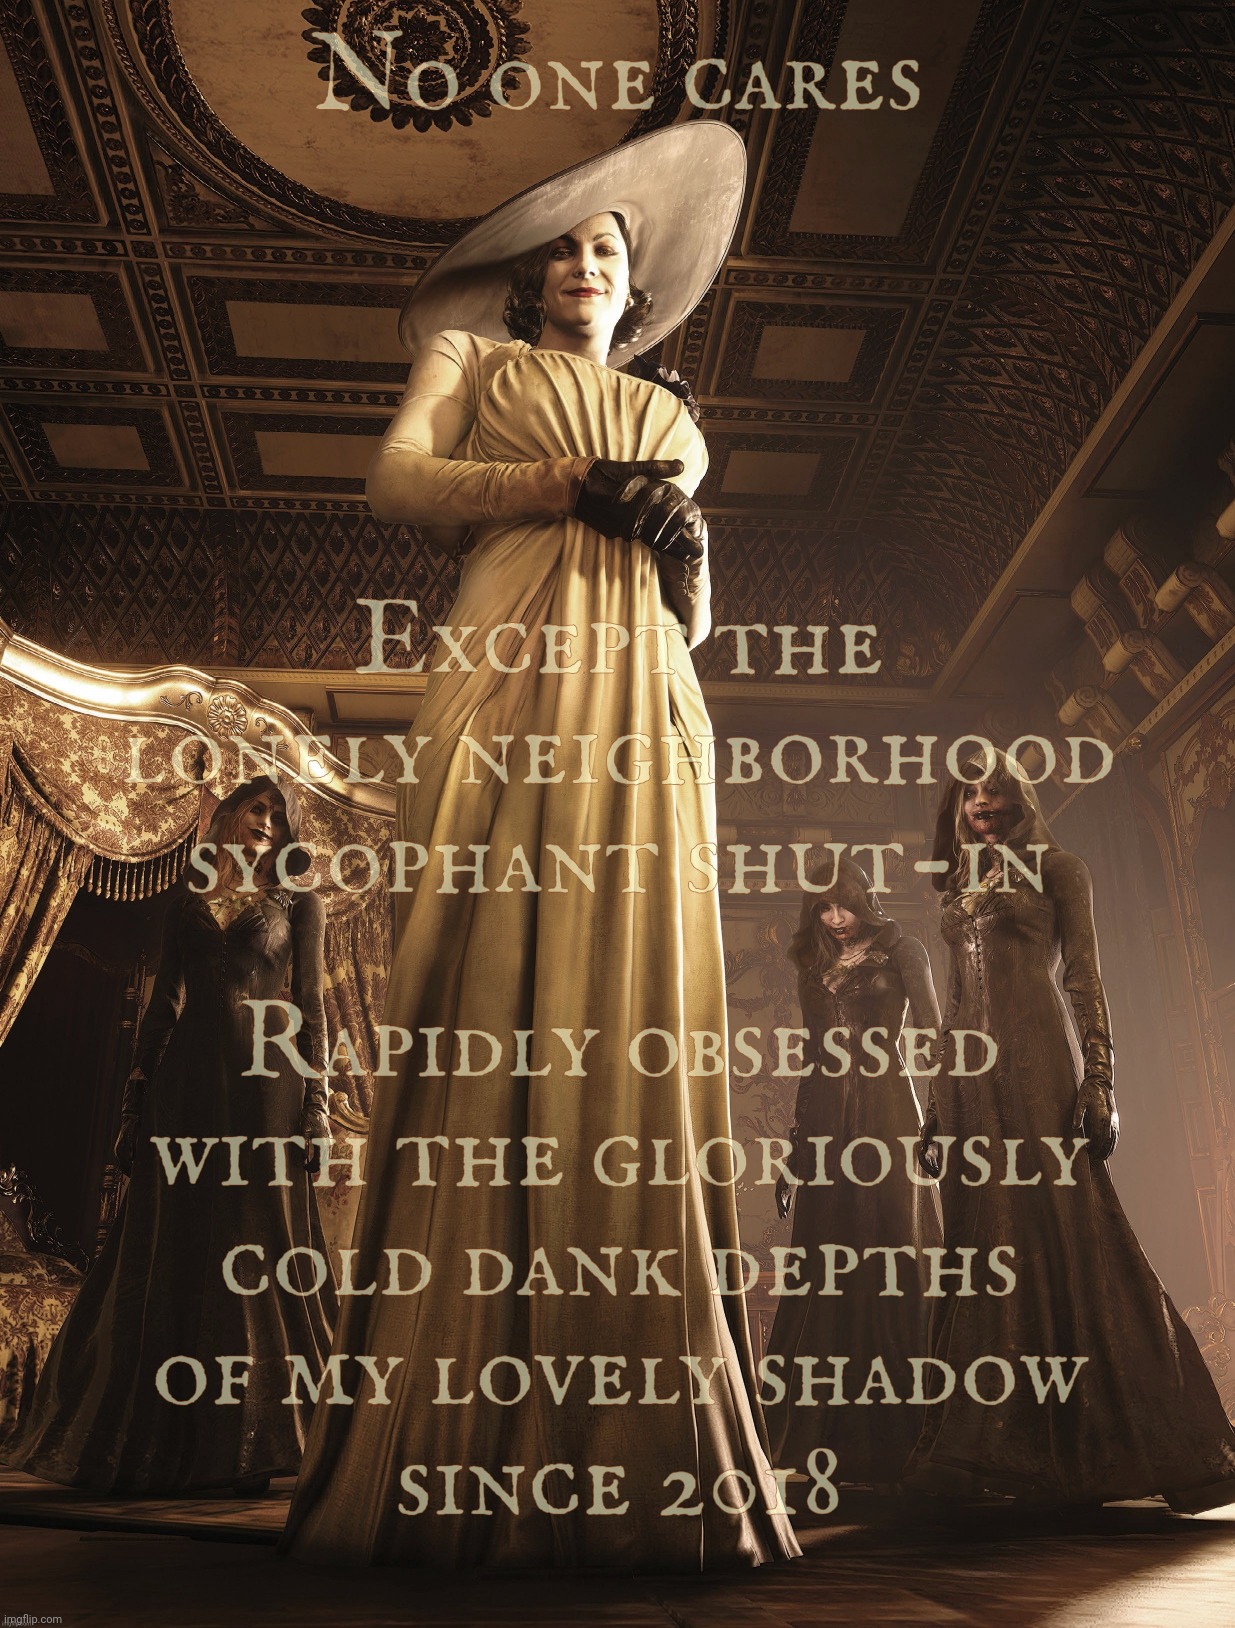 Lady Dimitrescu | No one cares Rapidly obsessed
with the gloriously
cold dank depths
of my lovely shadow
since 2018 Except the lonely neighborhood
sycophant s | image tagged in lady dimitrescu | made w/ Imgflip meme maker